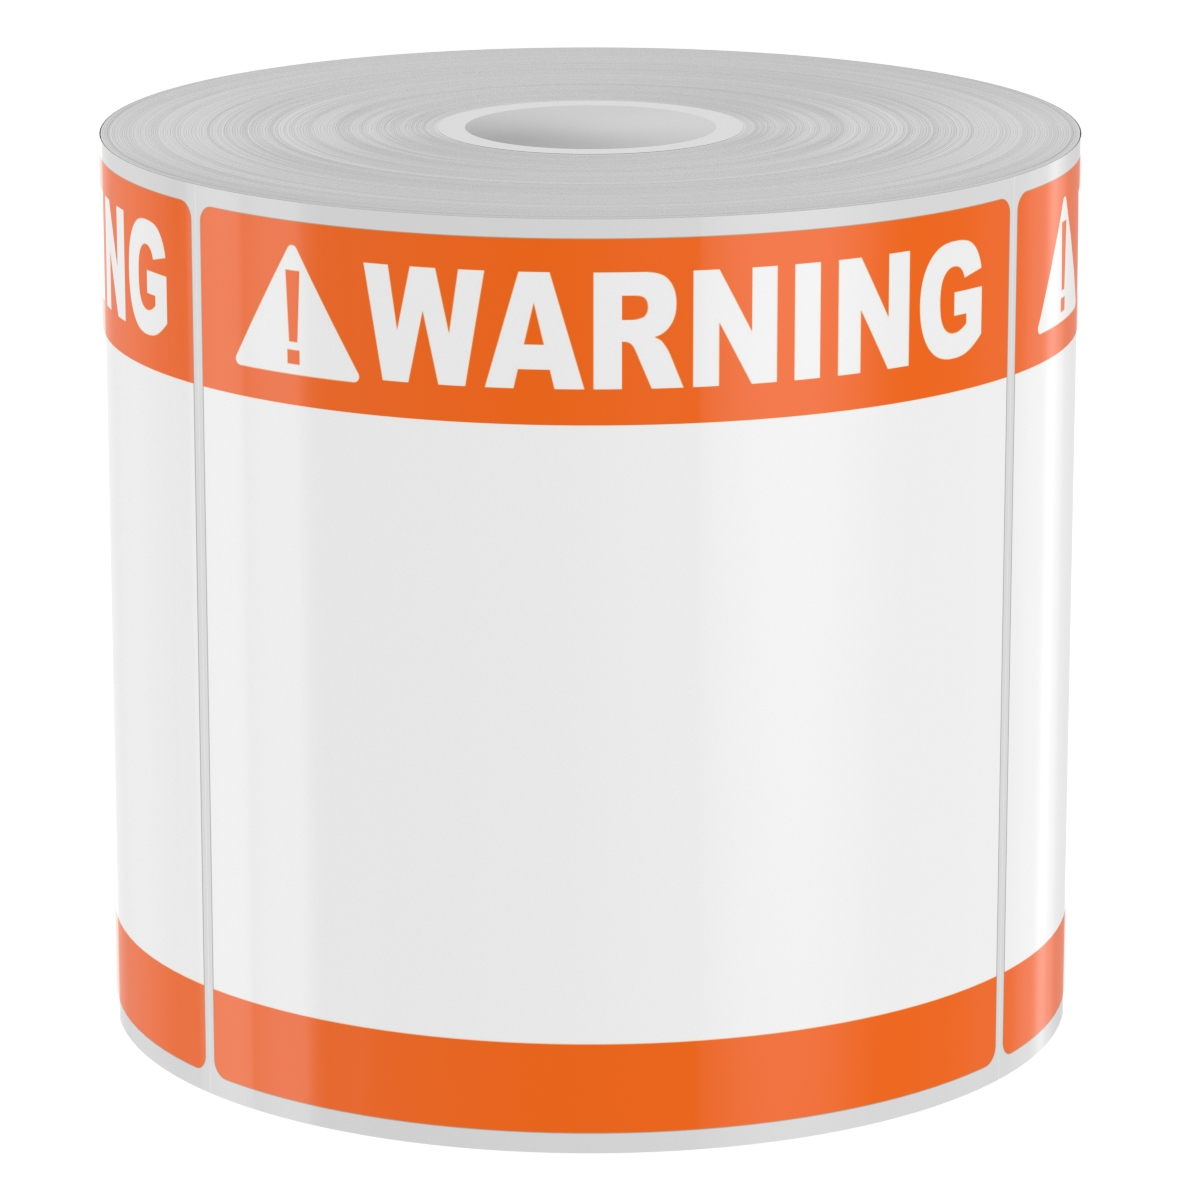 Ask a question about 250 4" x 4" High-Performance Die-Cut Orange with White Warning Double Band